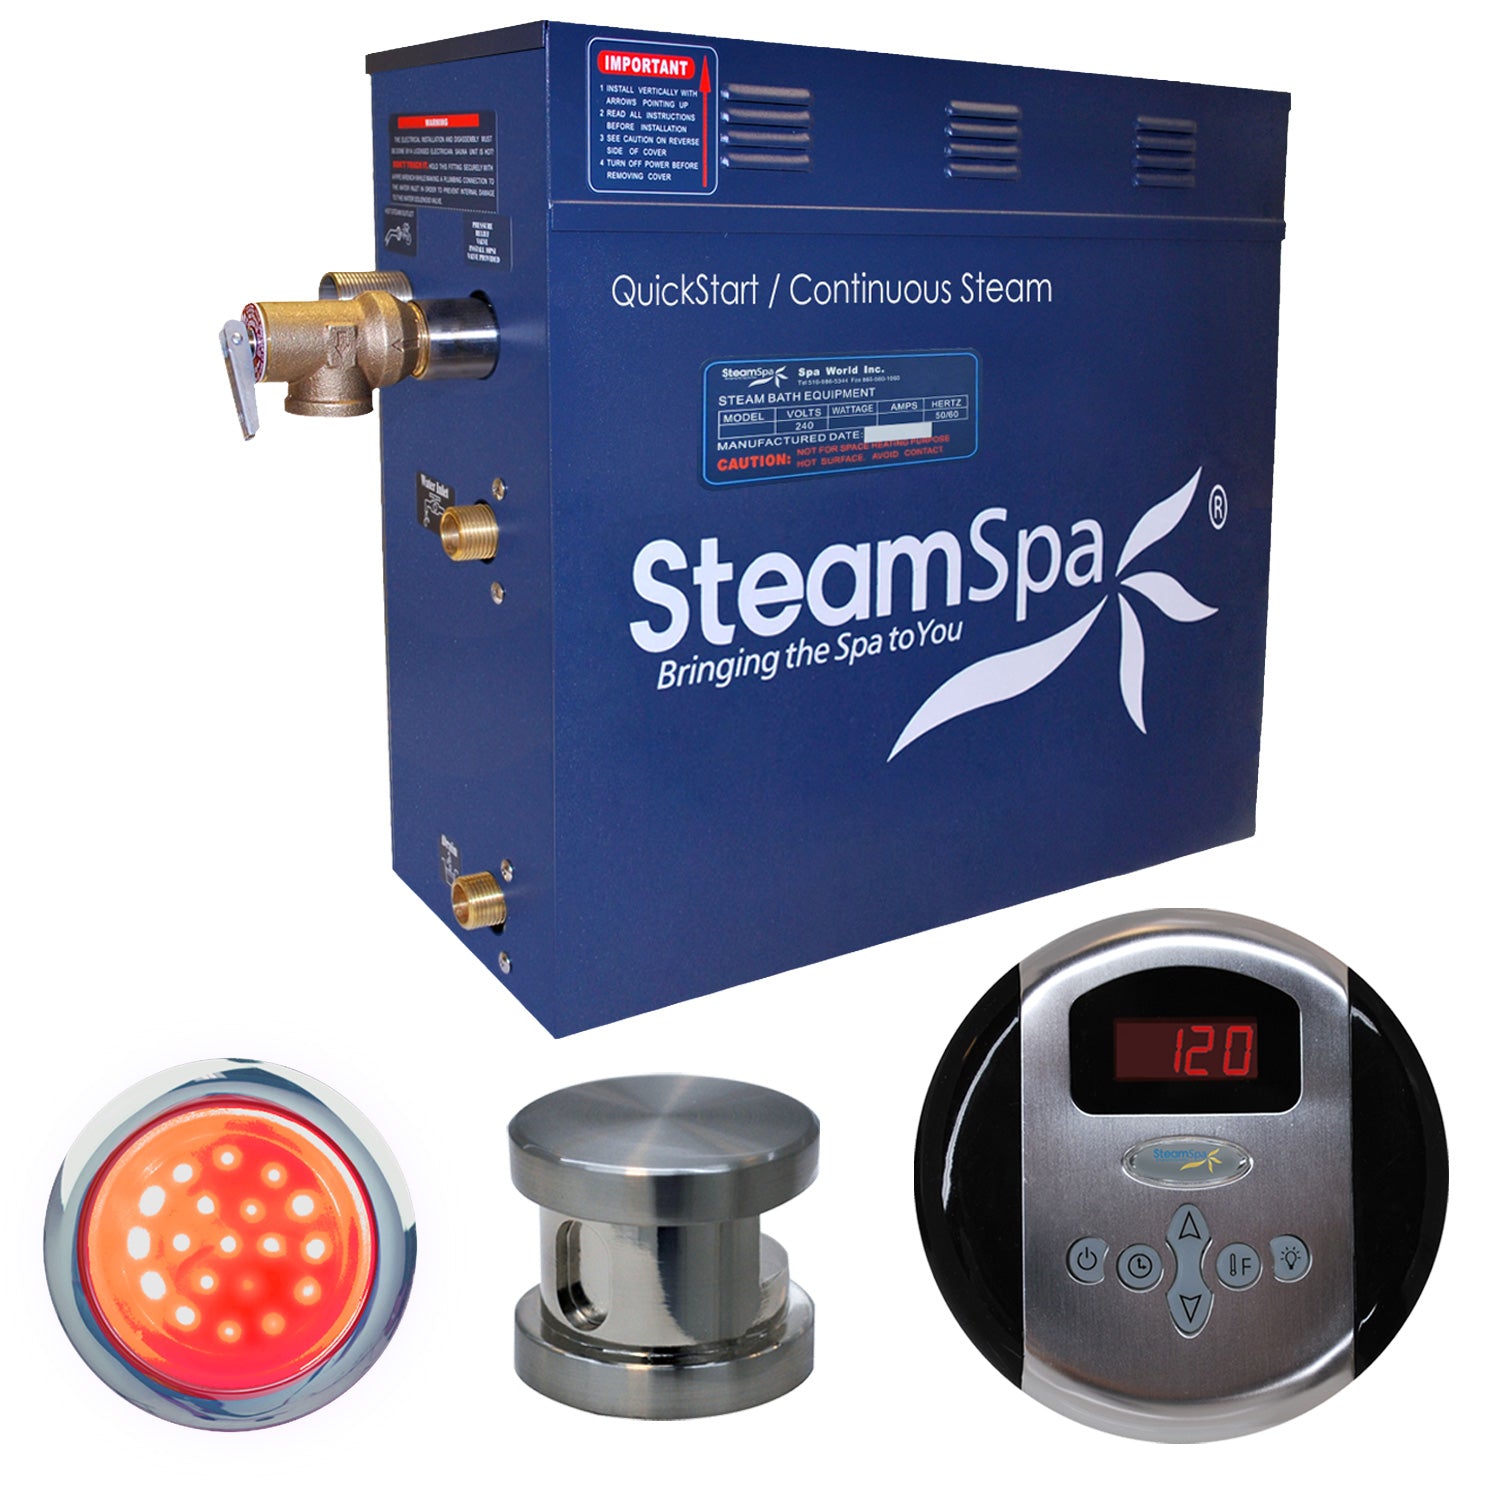 SteamSpa Indulgence 6 KW QuickStart Acu-Steam Bath Generator Package IN600 - 16 in. L x 6.5 in. W x 14.5 in. H - Brushed Nickel finish - Includes a 6kW QuickStart Acu-Steam Bath Generator, Control Panel, Brushed Nickel Steam head, Chroma therapy Light, Pressure Relief Valve - Vital Hydrotherapy